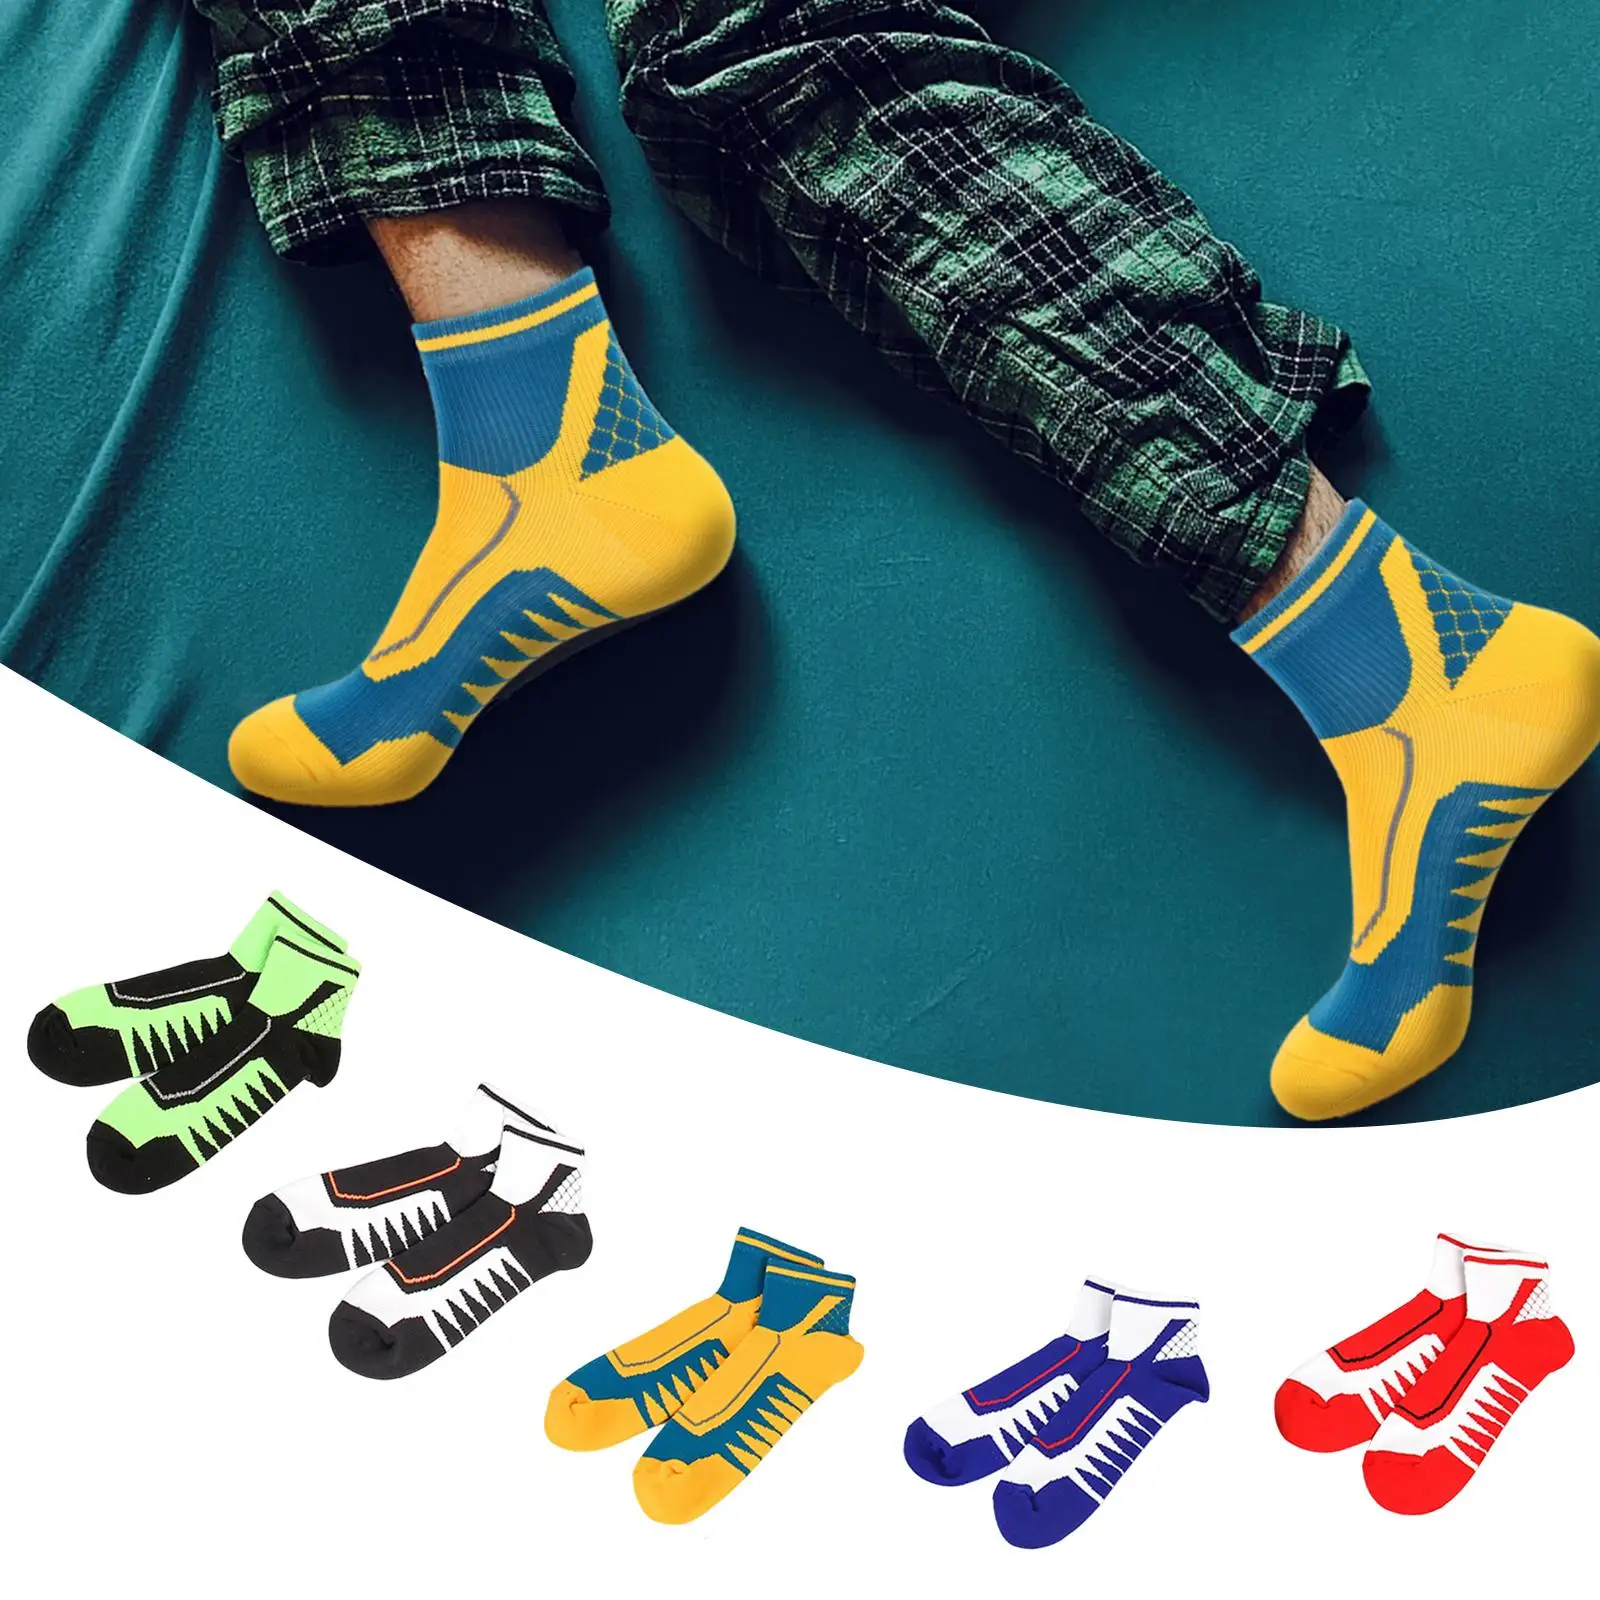 Fashion 5 Pairs Men Crew Socks Comfortable Absorb Sweat Breathable Thick Winter Athletic Sports Ankle Socks for New Year Home